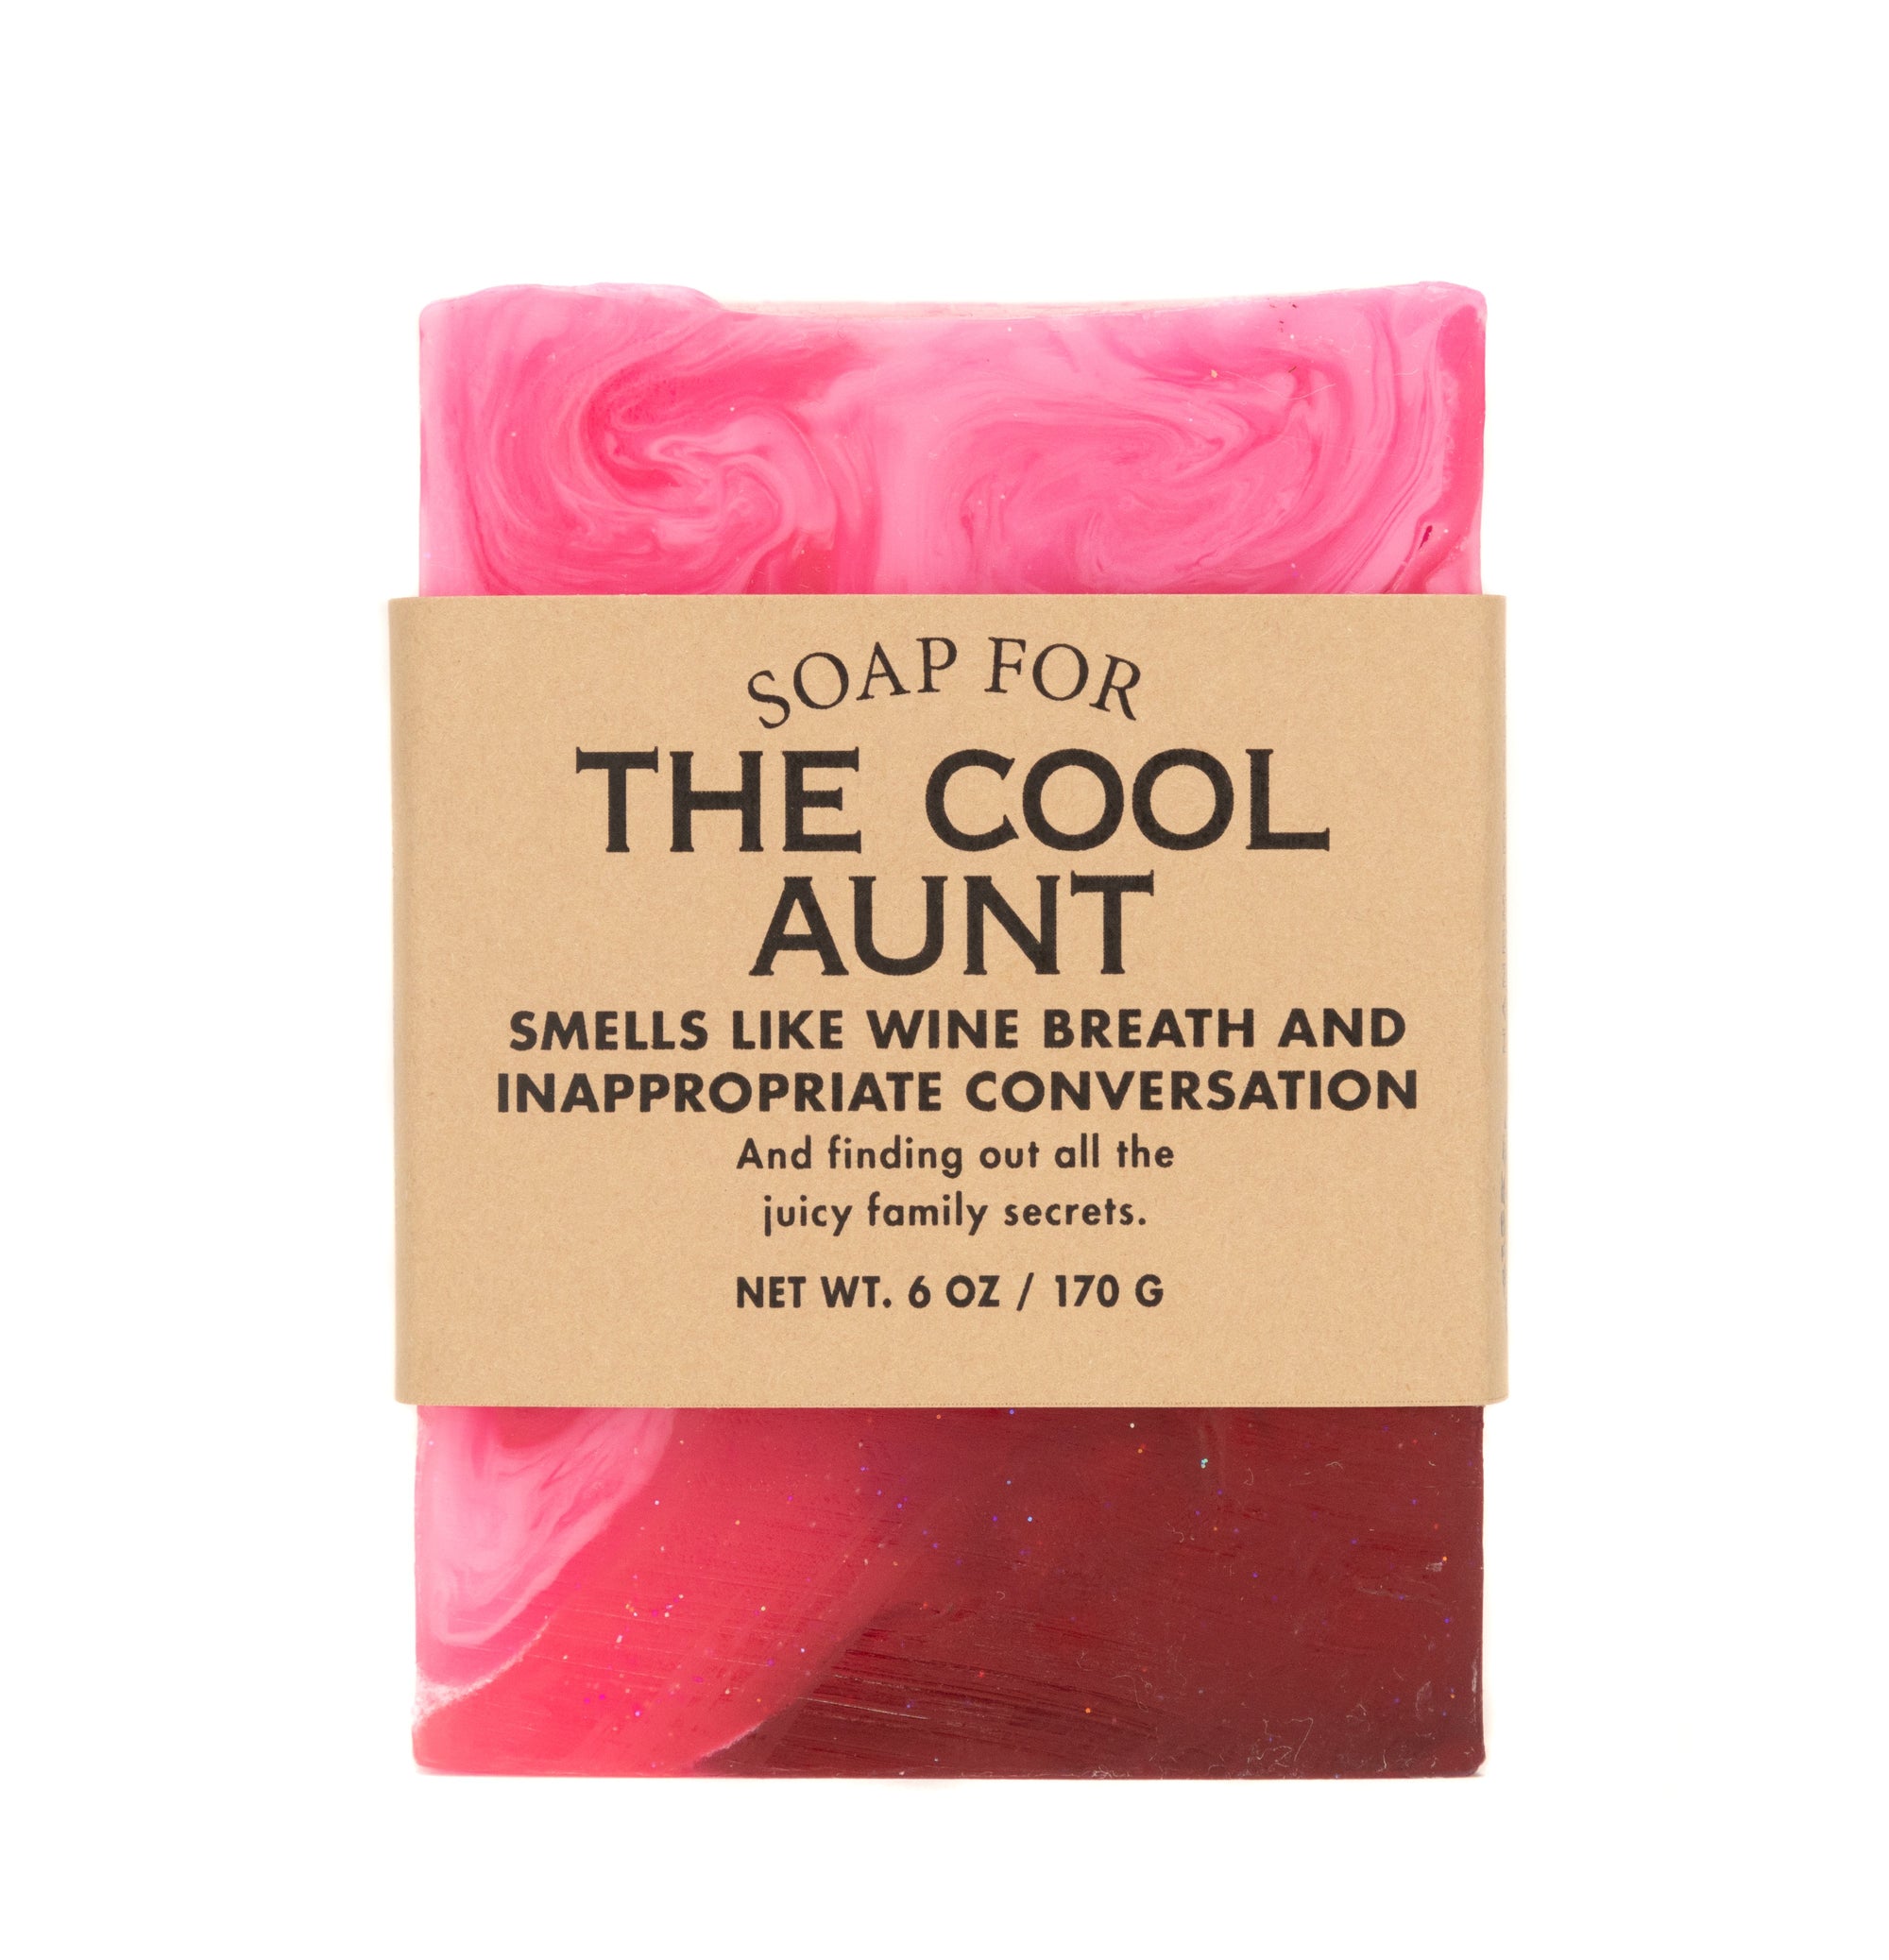 Soap for the Cool Aunt - Heart of the Home PA